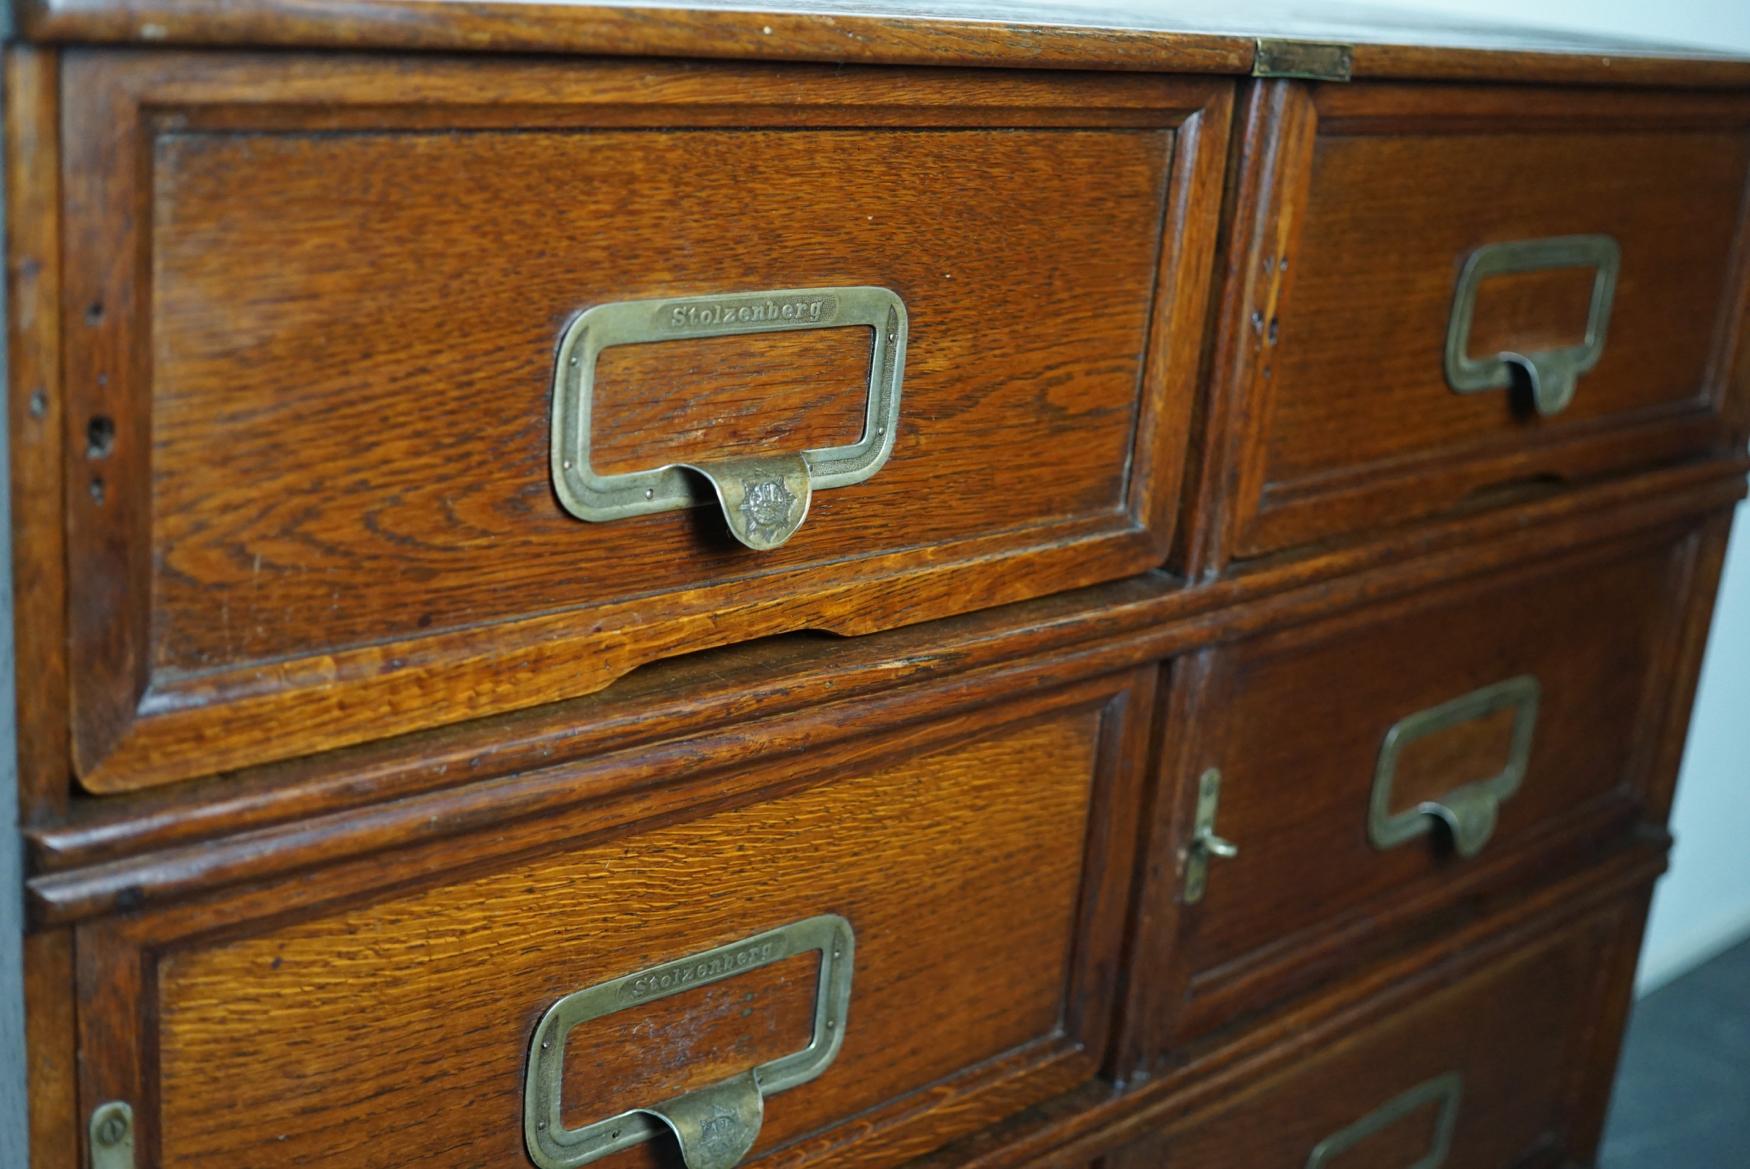 Mid-20th Century Antique German Oak Filing Cabinet with Drop Down Doors by Stolzenberg, 1930s